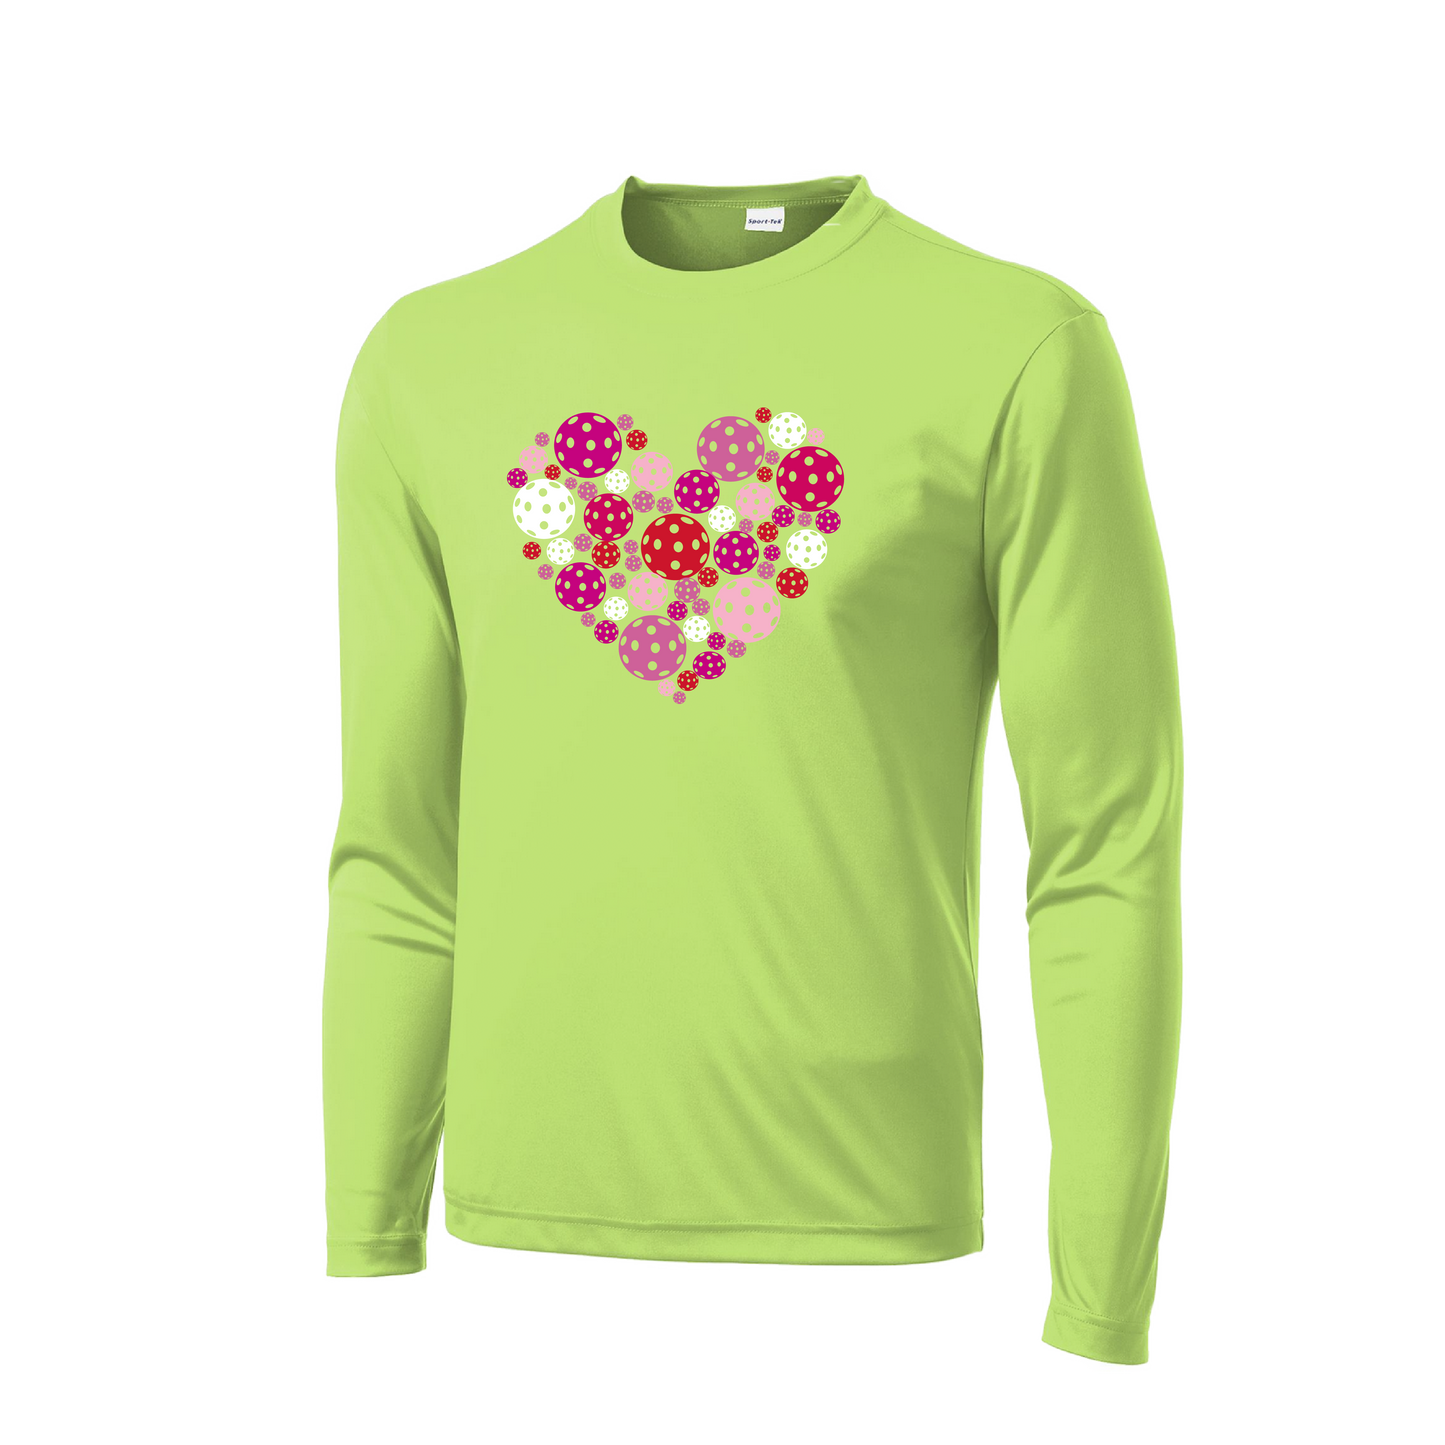 This Men's Long-Sleeved Pickleball Shirt is lightweight and roomy, designed to enable high levels of mobility and breathability. Featuring moisture-wicking fabric and PosiCharge technology for vivid, lasting color, plus set-in sleeves and a removable tag for optimum comfort.